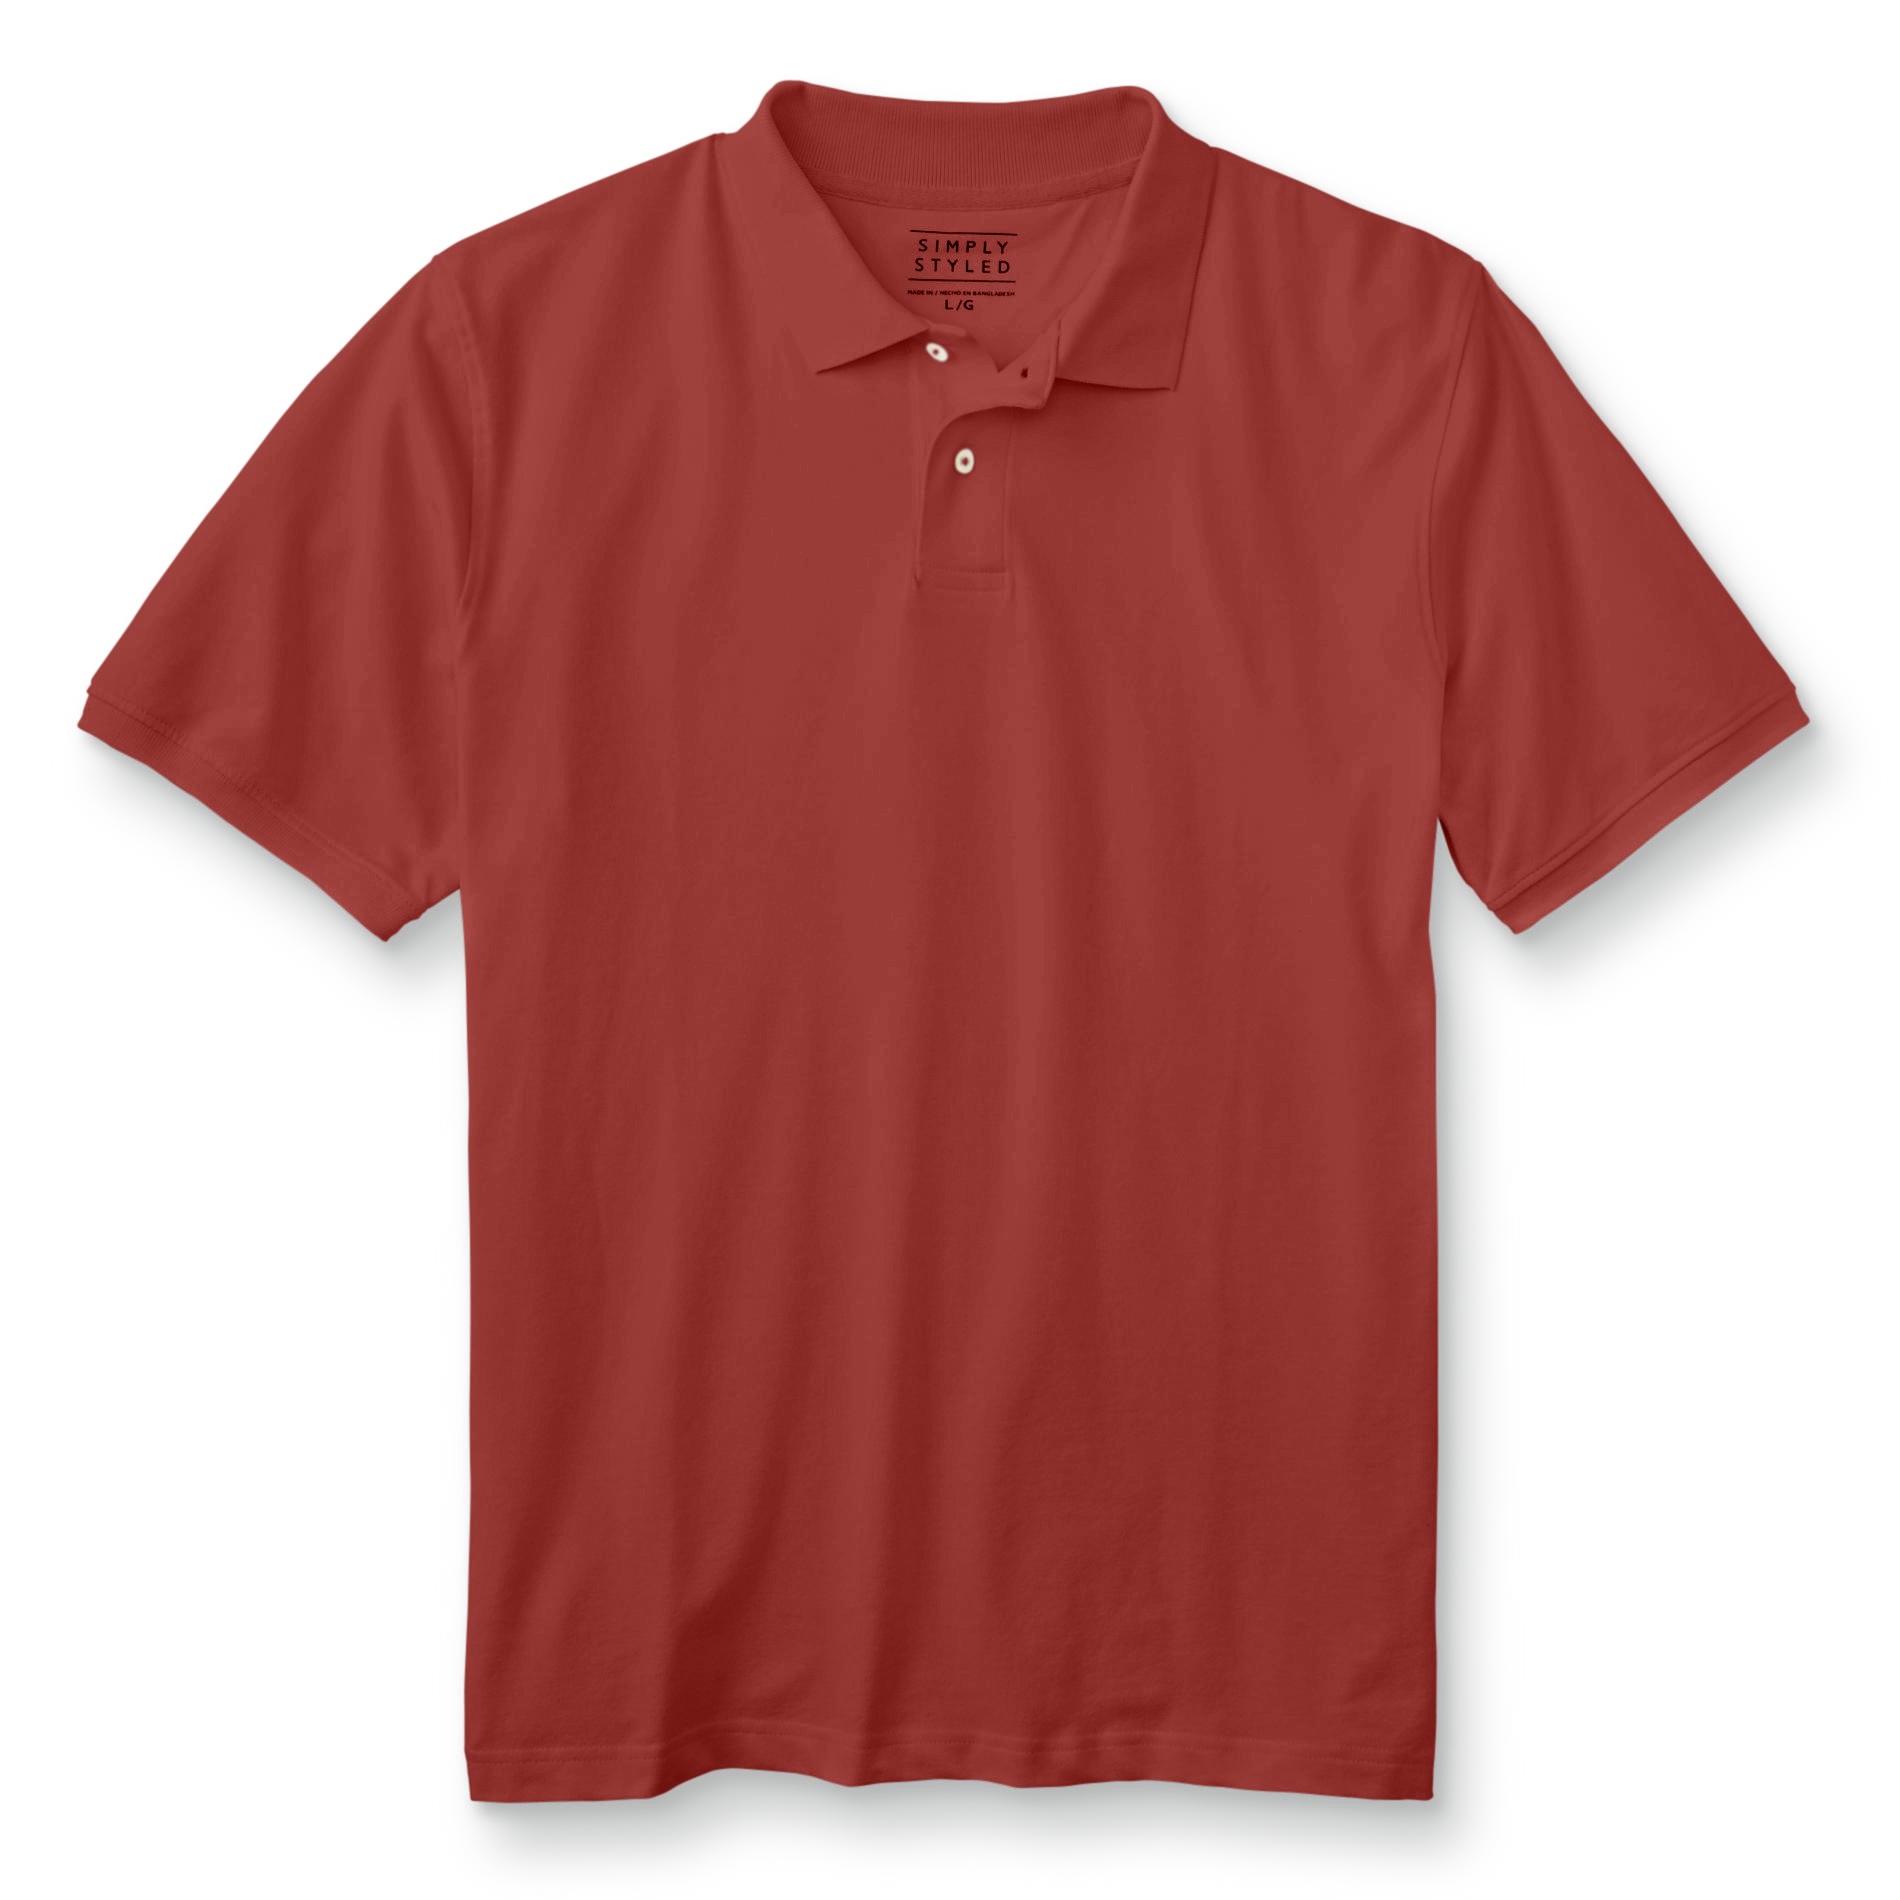 Simply Styled Men's Big & Tall Pique Polo Shirt